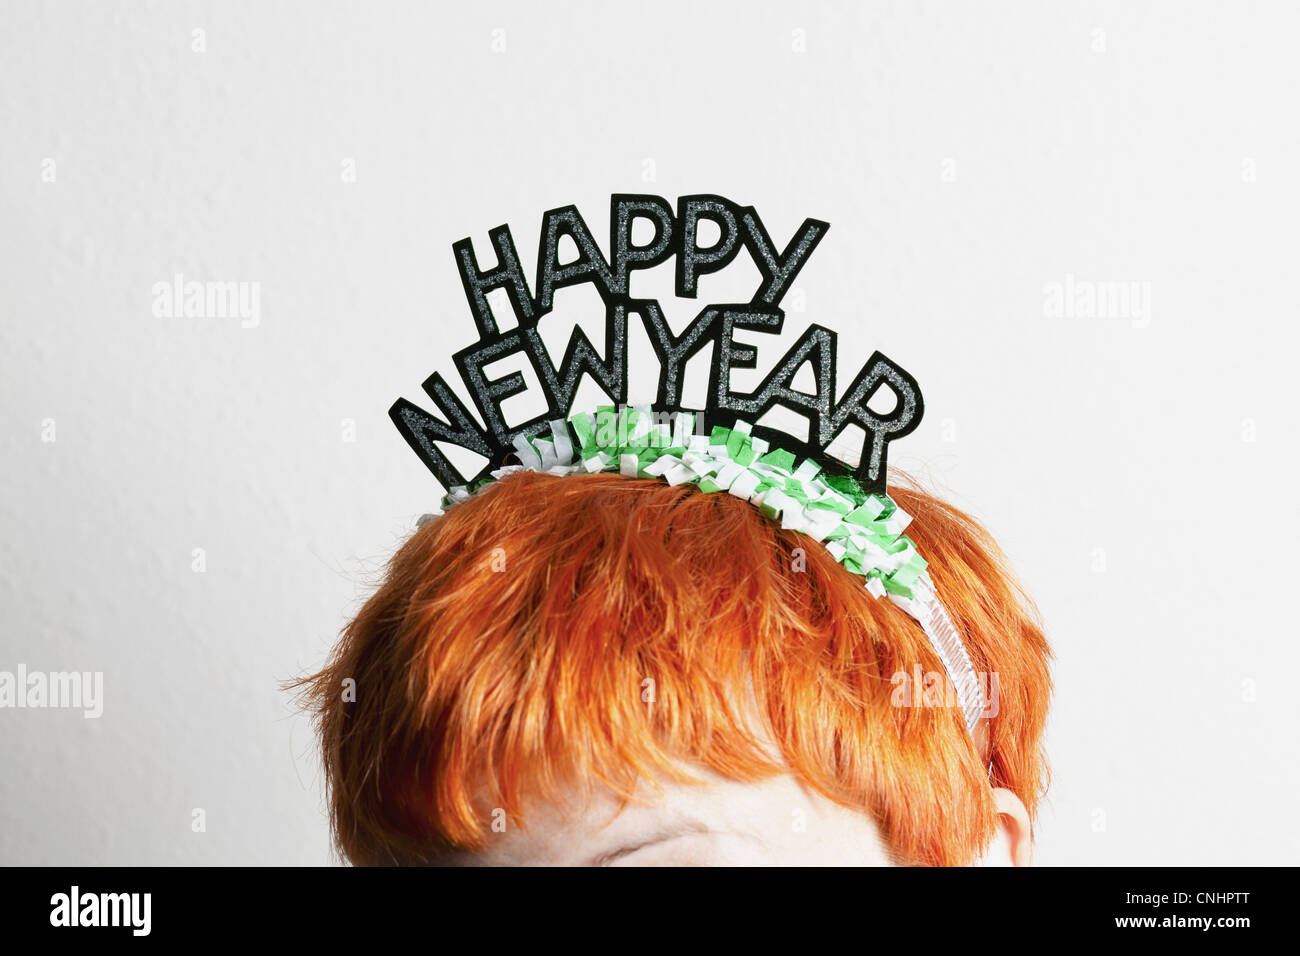 A woman wearing a party tiara with Happy New Year on it, top of head Stock Photo